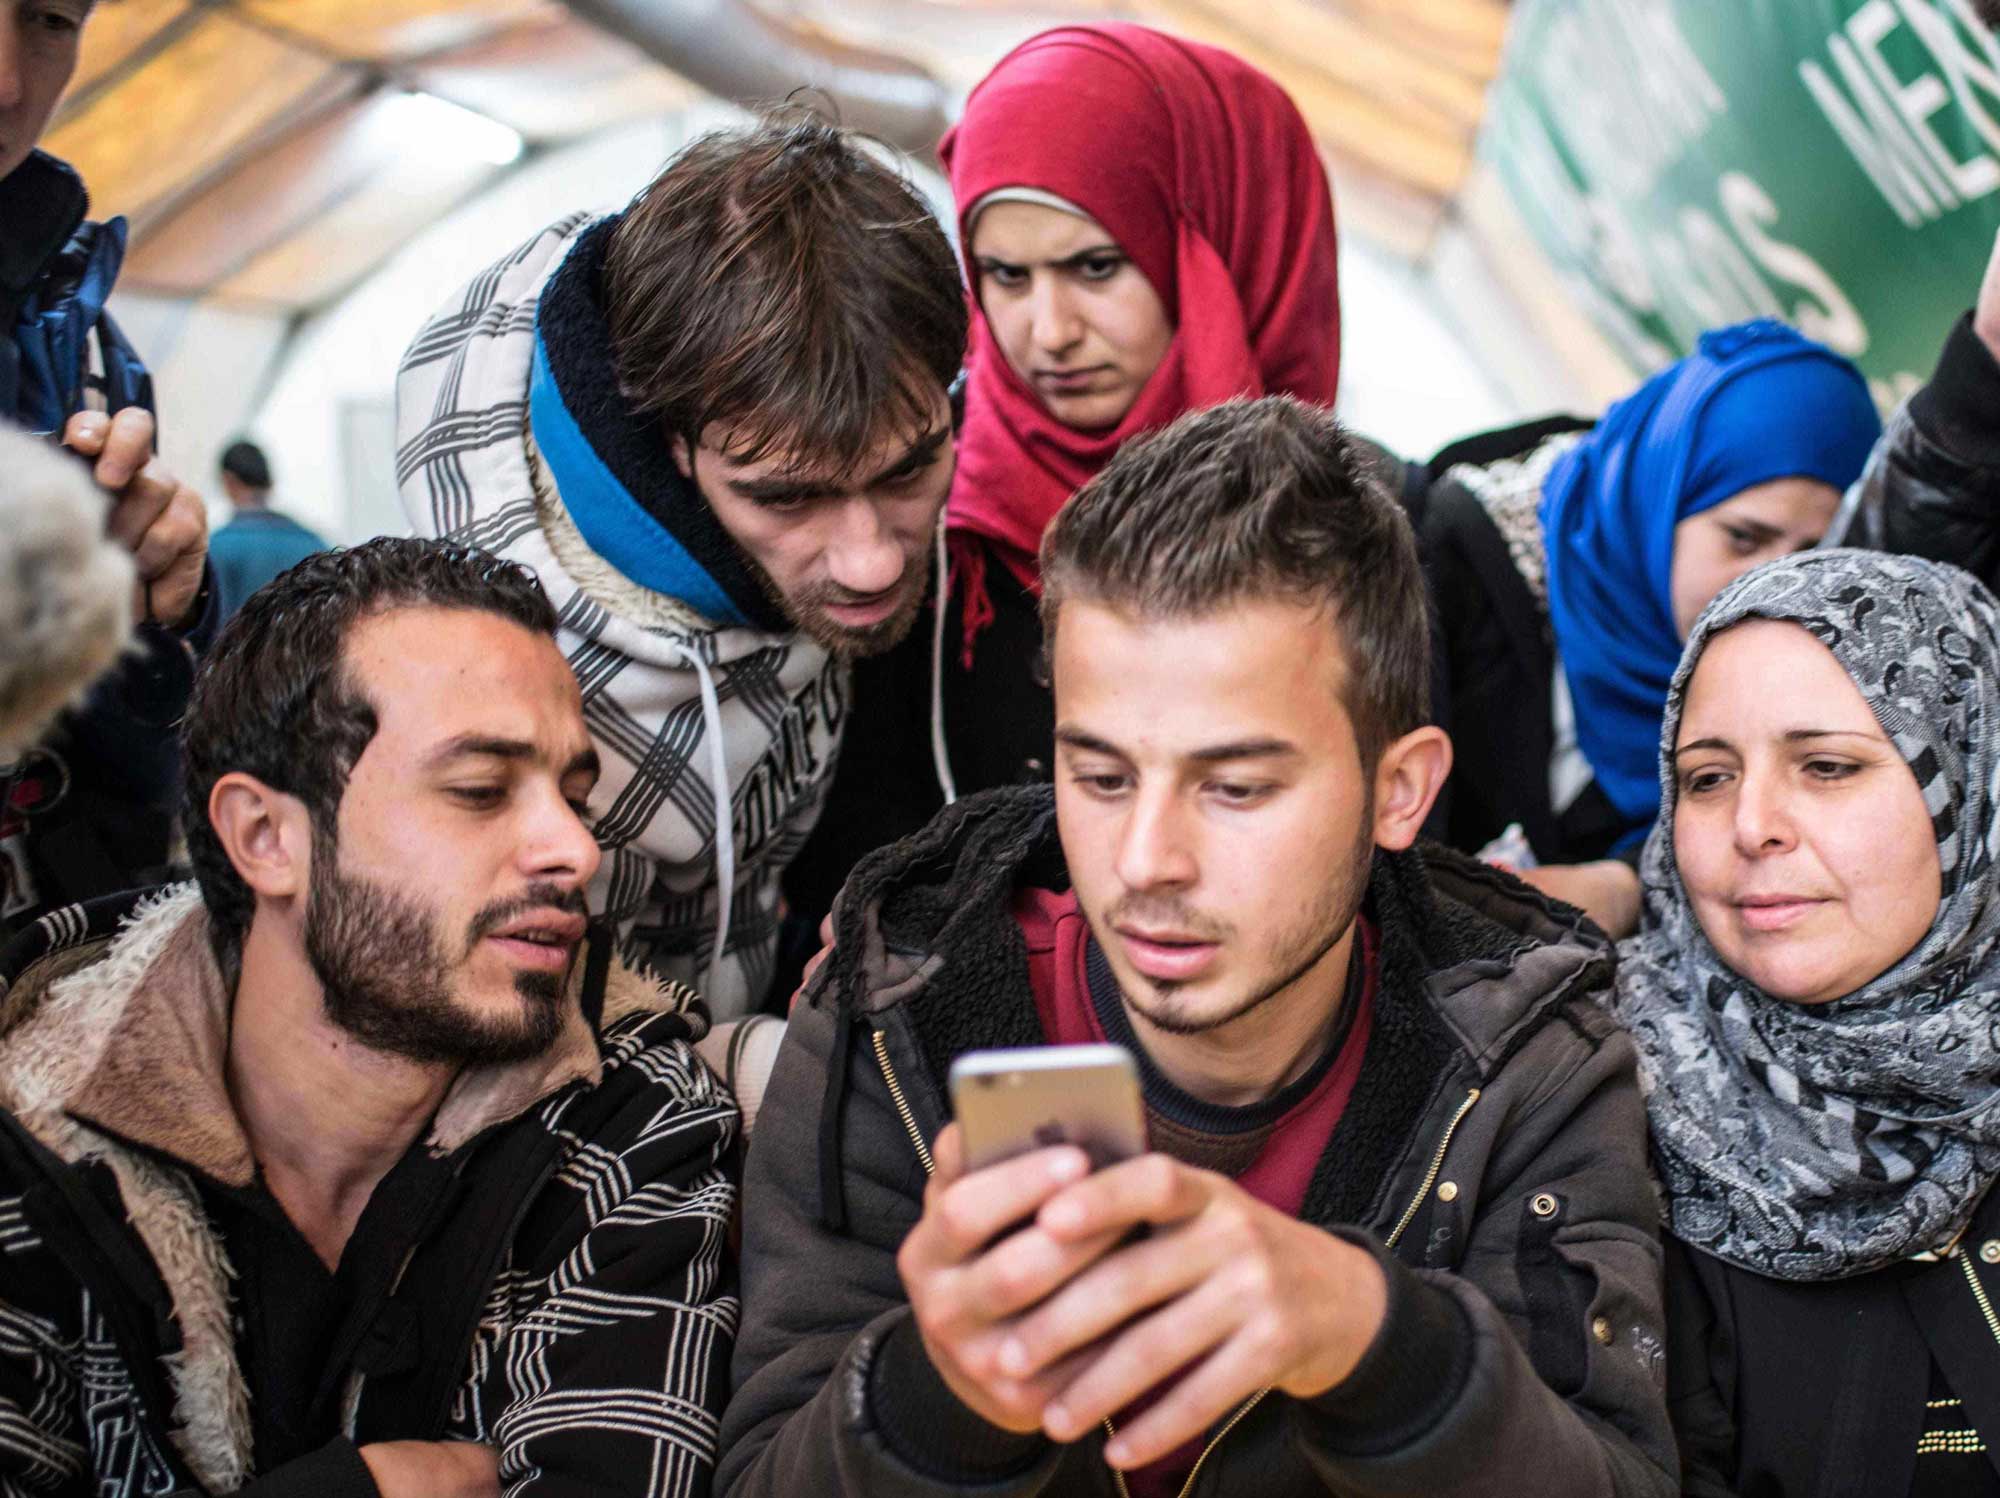 A Syrian refugee family looks at resources on a cell phone